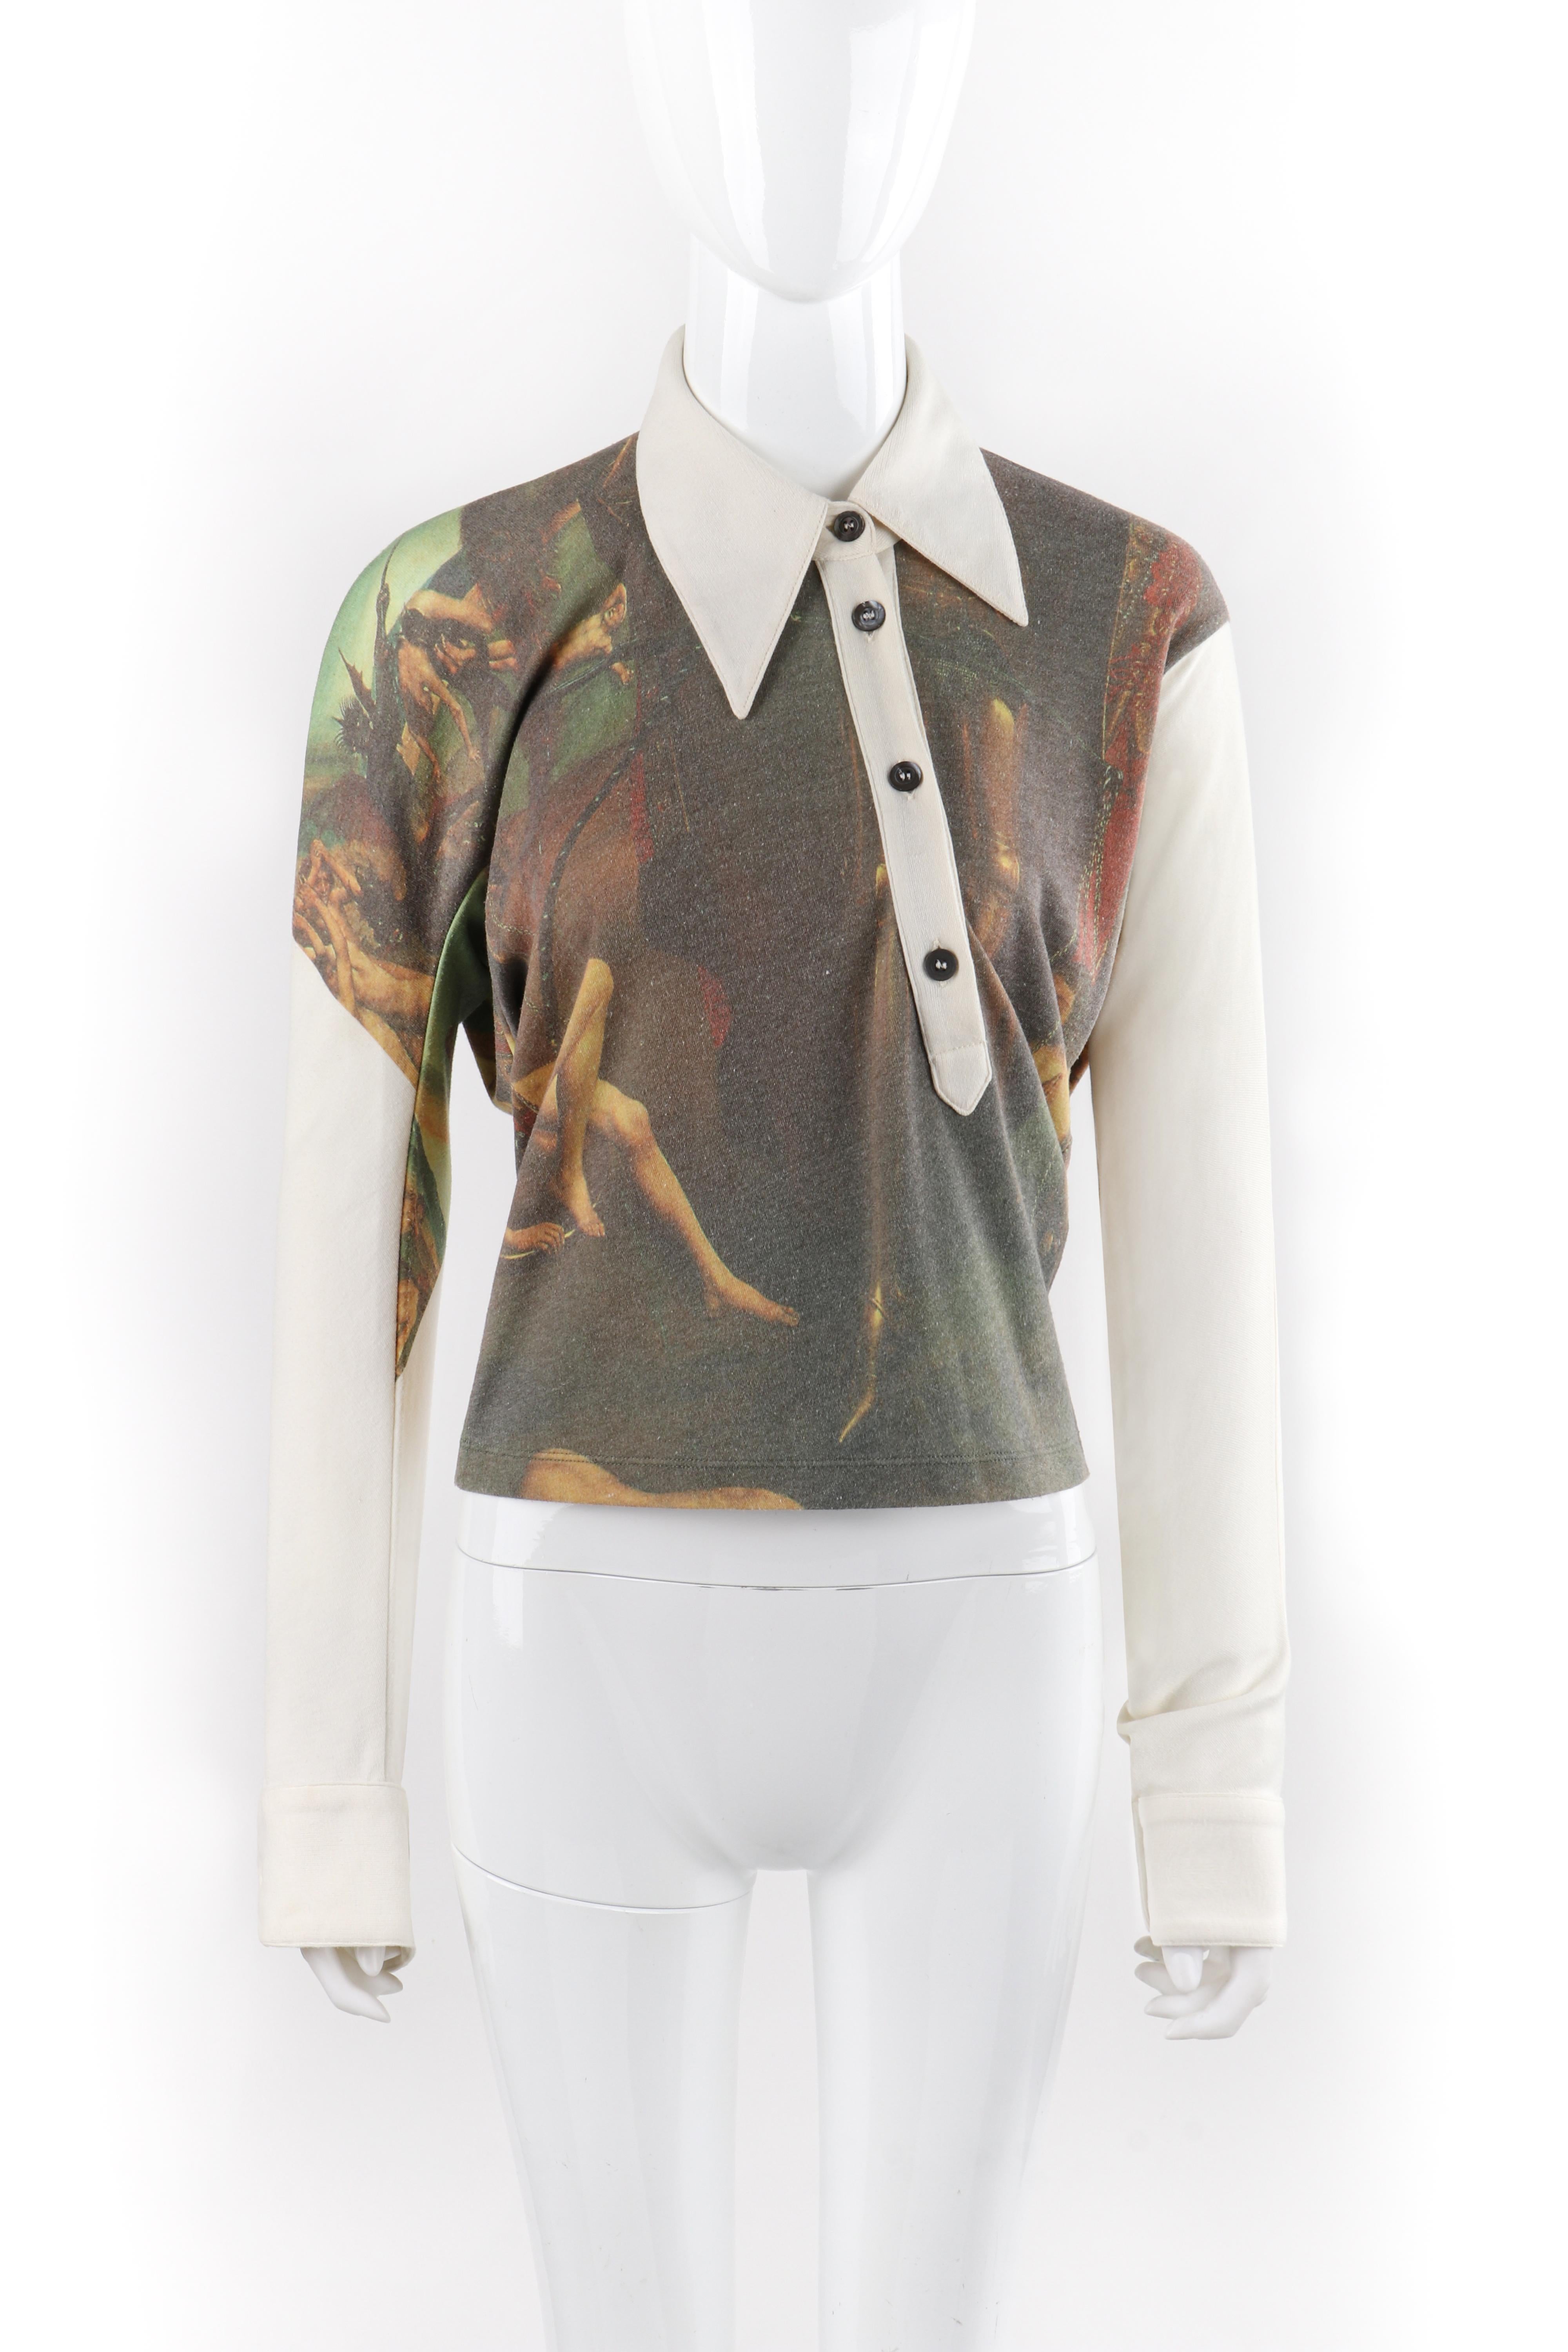 ALEXANDER McQUEEN A/W 1997 Roman Print Old Masters Asymmetric Button Front Shirt
 
Brand / Manufacturer: Alexander McQueen 
Collection: A/W 1997
Style: Button front shirt
Color(s): Multicolored
Lined: No
Marked Fabric Content: 65% polyester, 35%